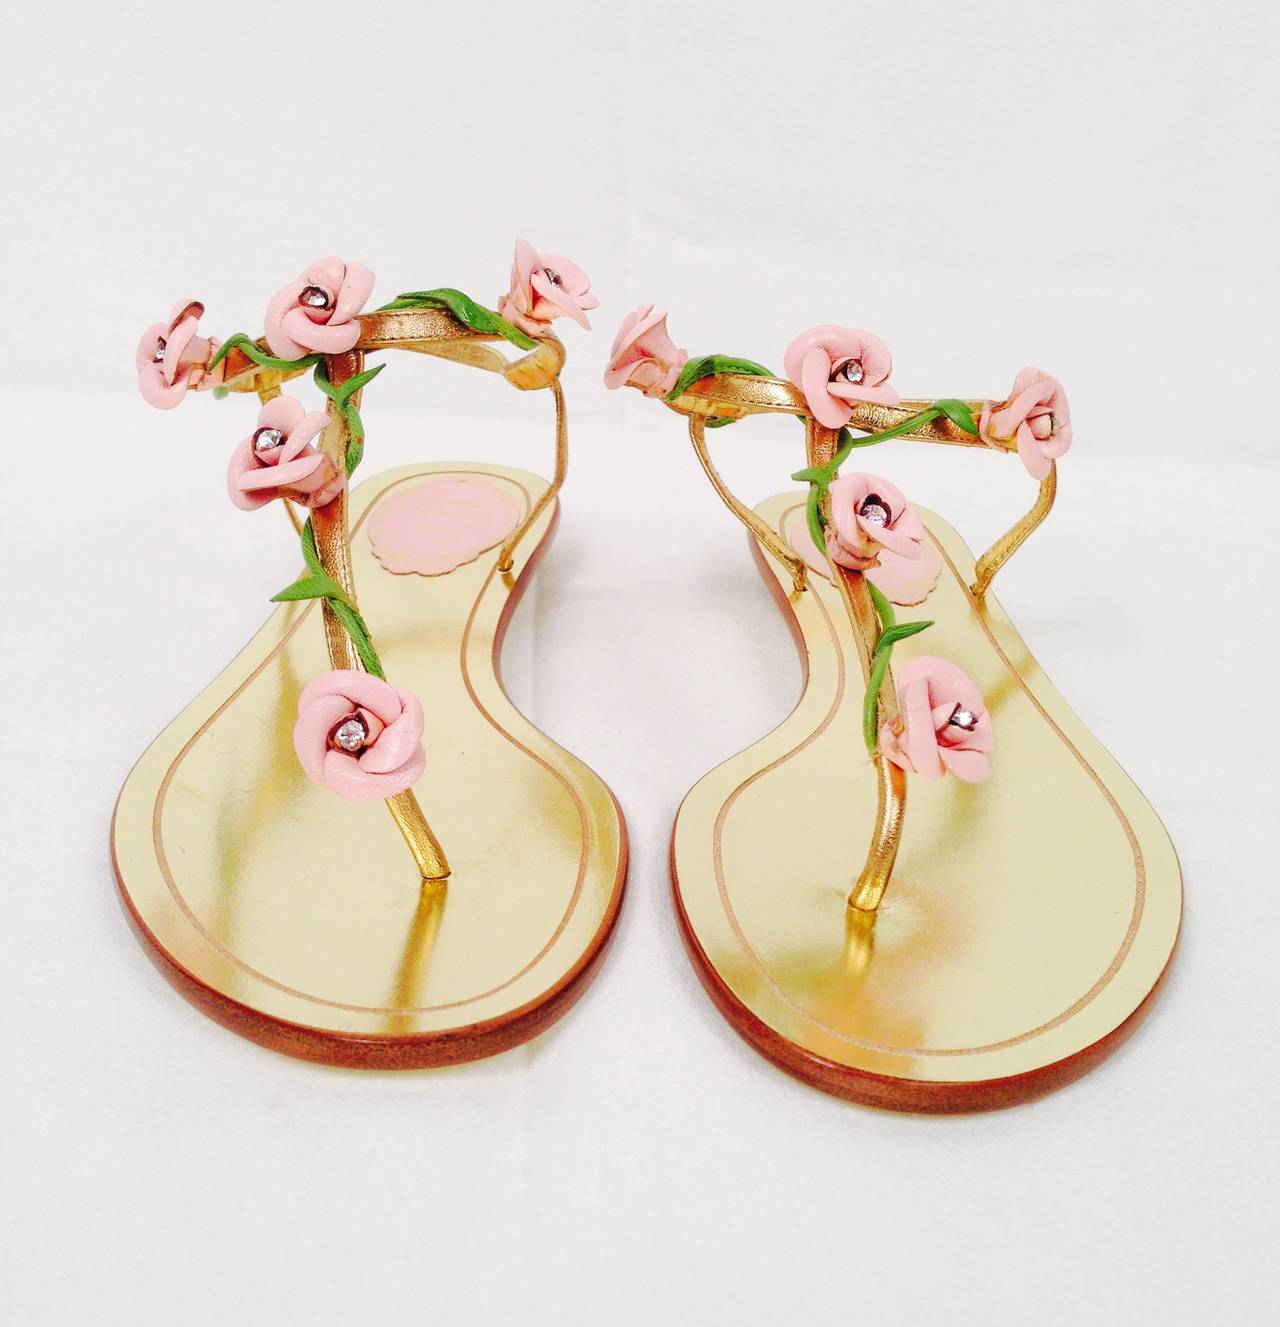 All that glitters is gold in these metallic gold leather thong sandals from Rene Caovilla!  Sandals feature delicately hand-crafted pink leather rosettes on a vine embellished with one center crystal. Metallic leather insole AND sole.  What a sweet